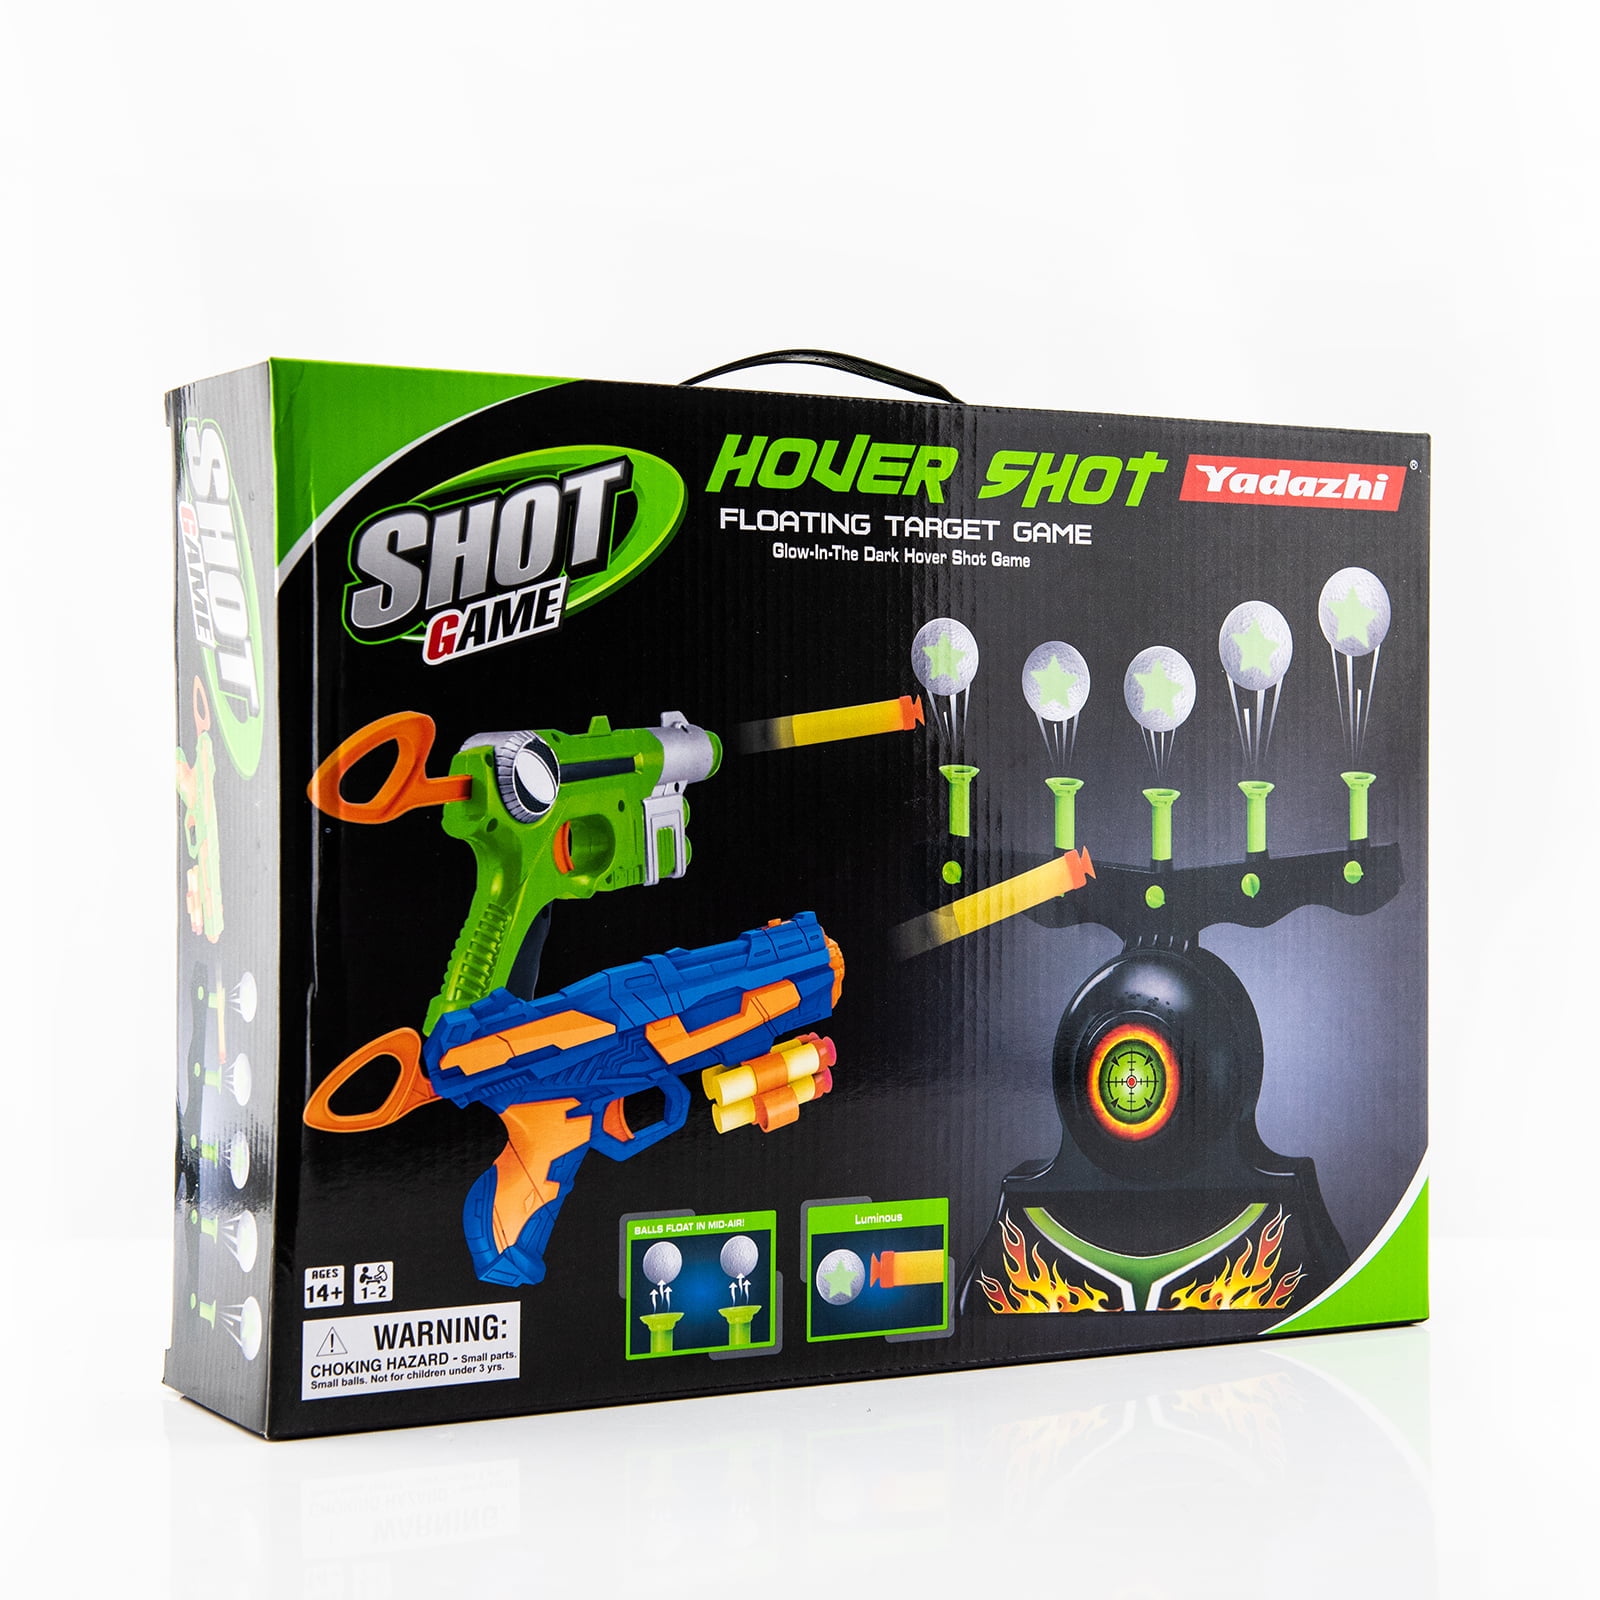 Floating Ball Shooting Games for Kids Guns,USB Powered Shooting Targets Practice for Boys with 1 Foam Dart Guns, 10 Foam Balls and 3 Darts,Boys Toys for 5 6 7 8 9 10 11 12 Year Old Boys